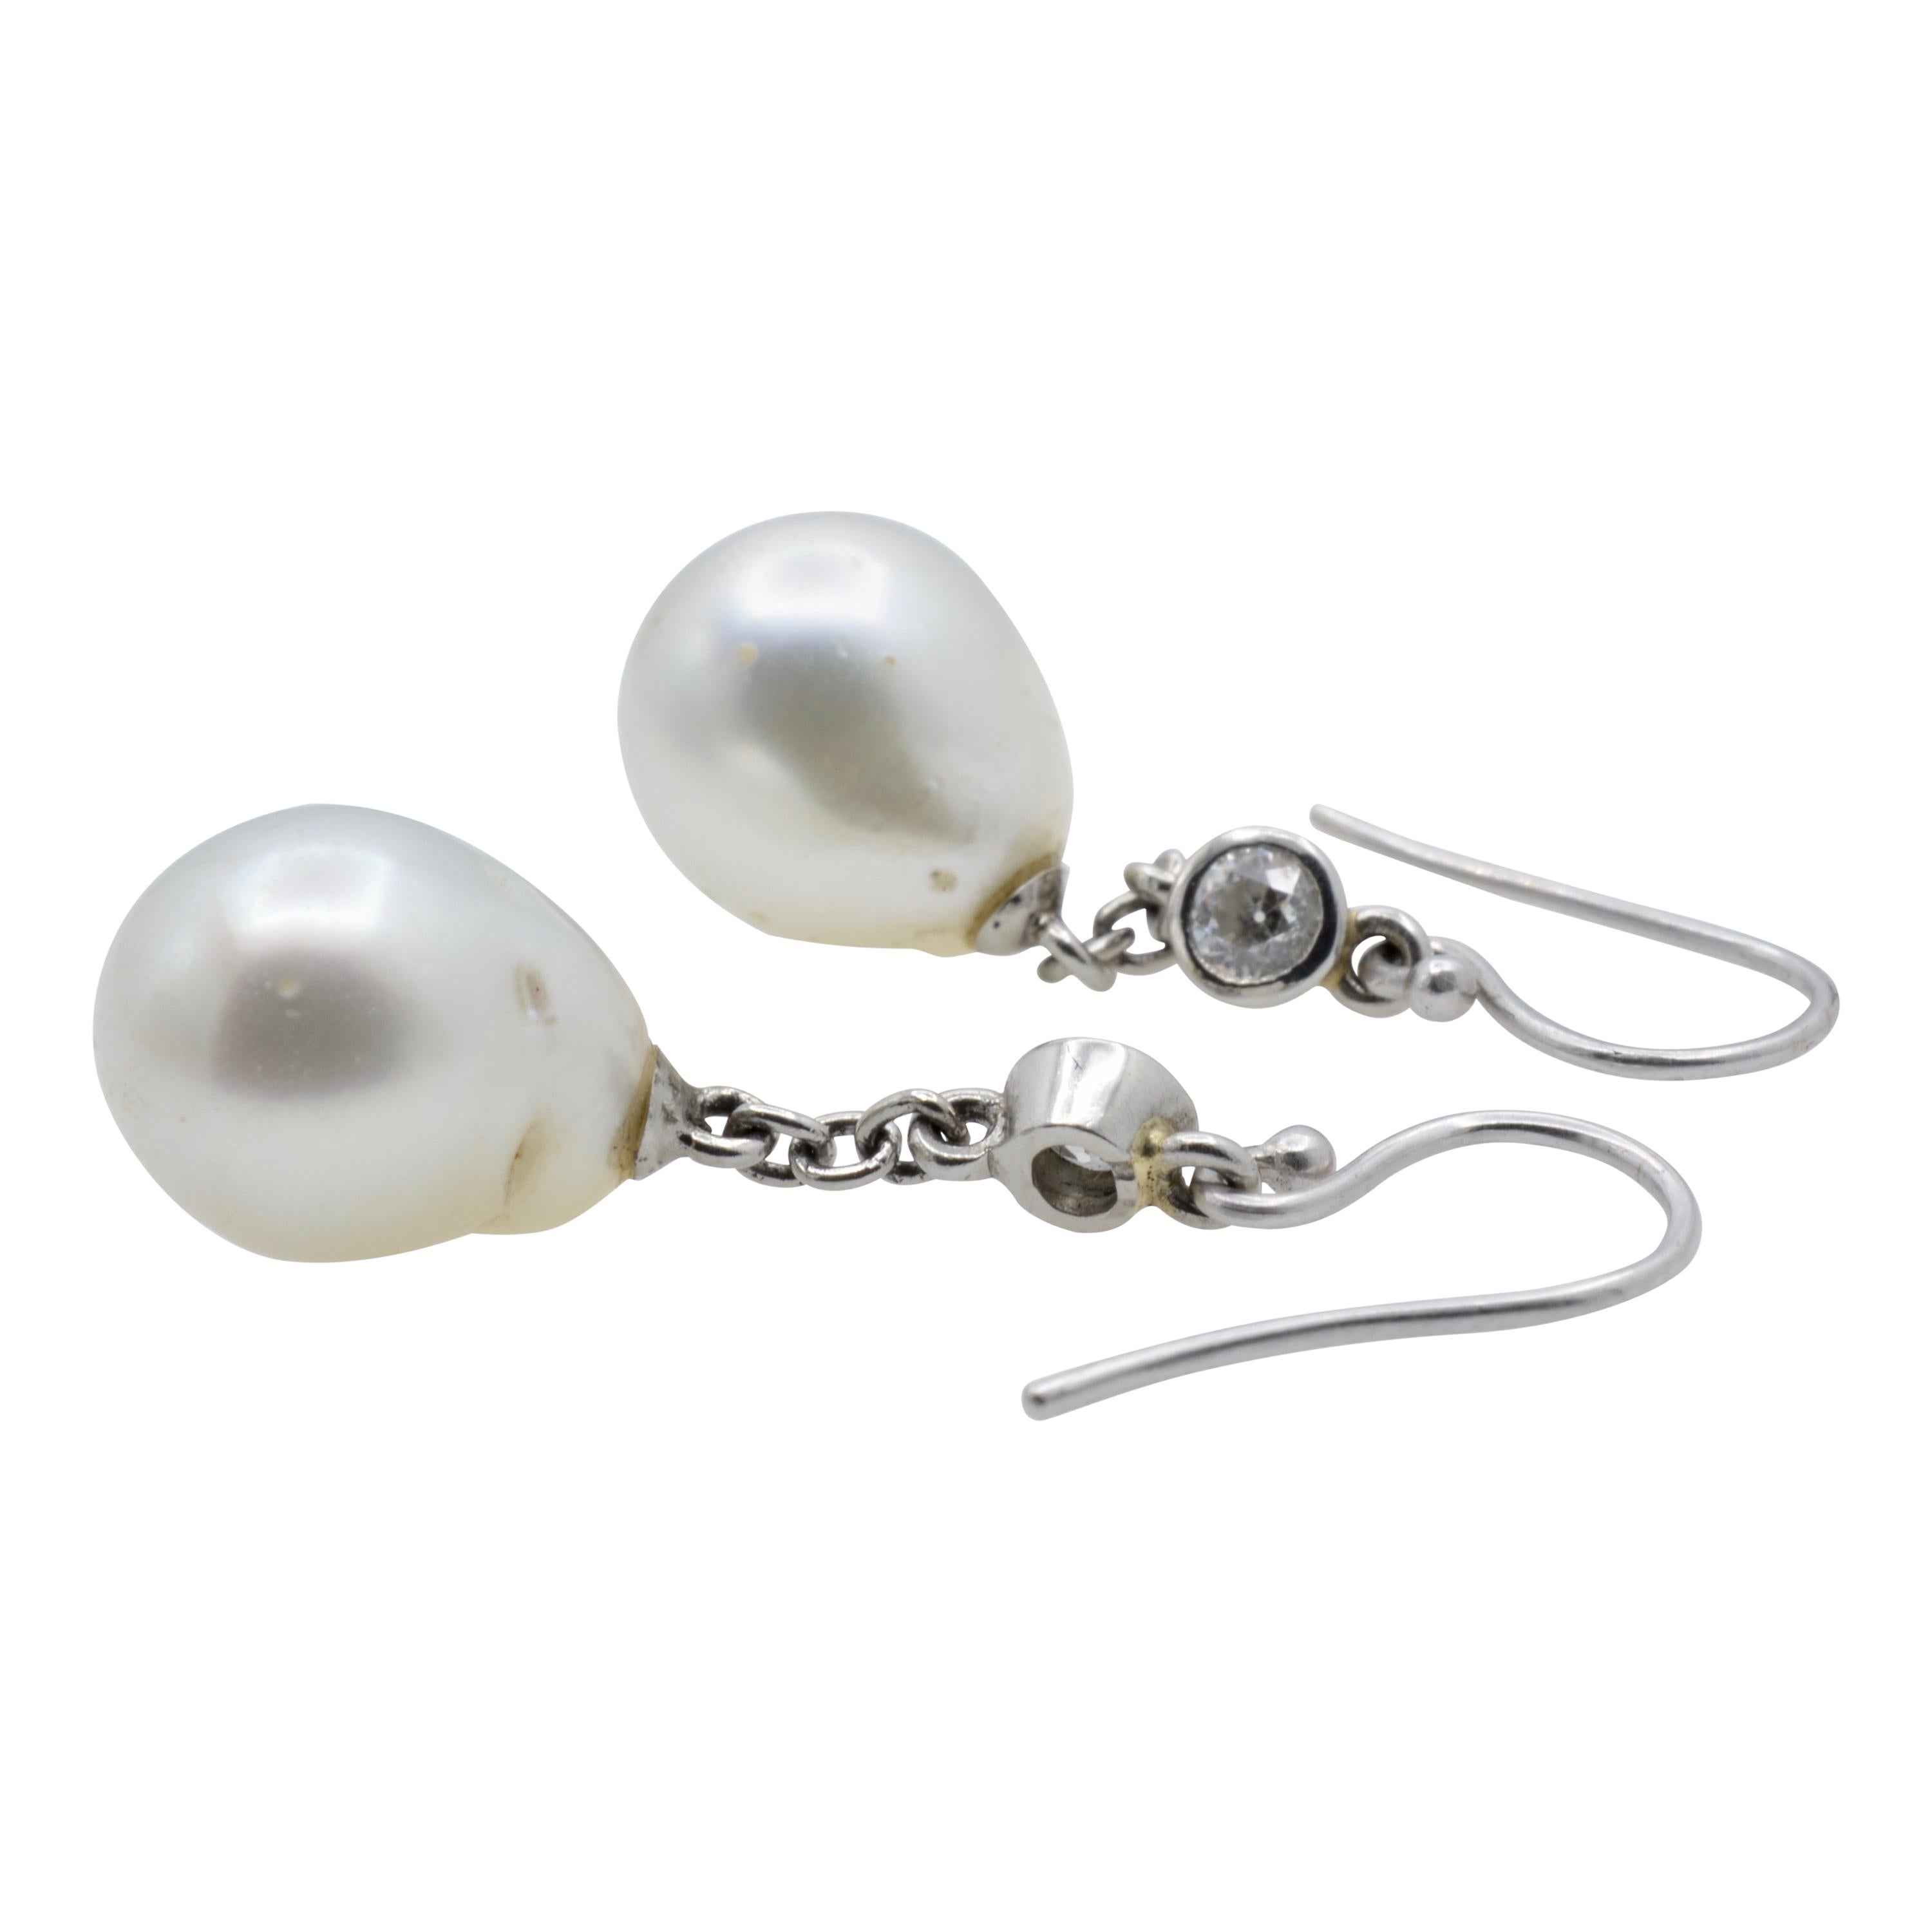 These white South Sea pearls are beautifully dripping from a diamond and platinum chain. The style is classic and chic. You will wear these earrings often!